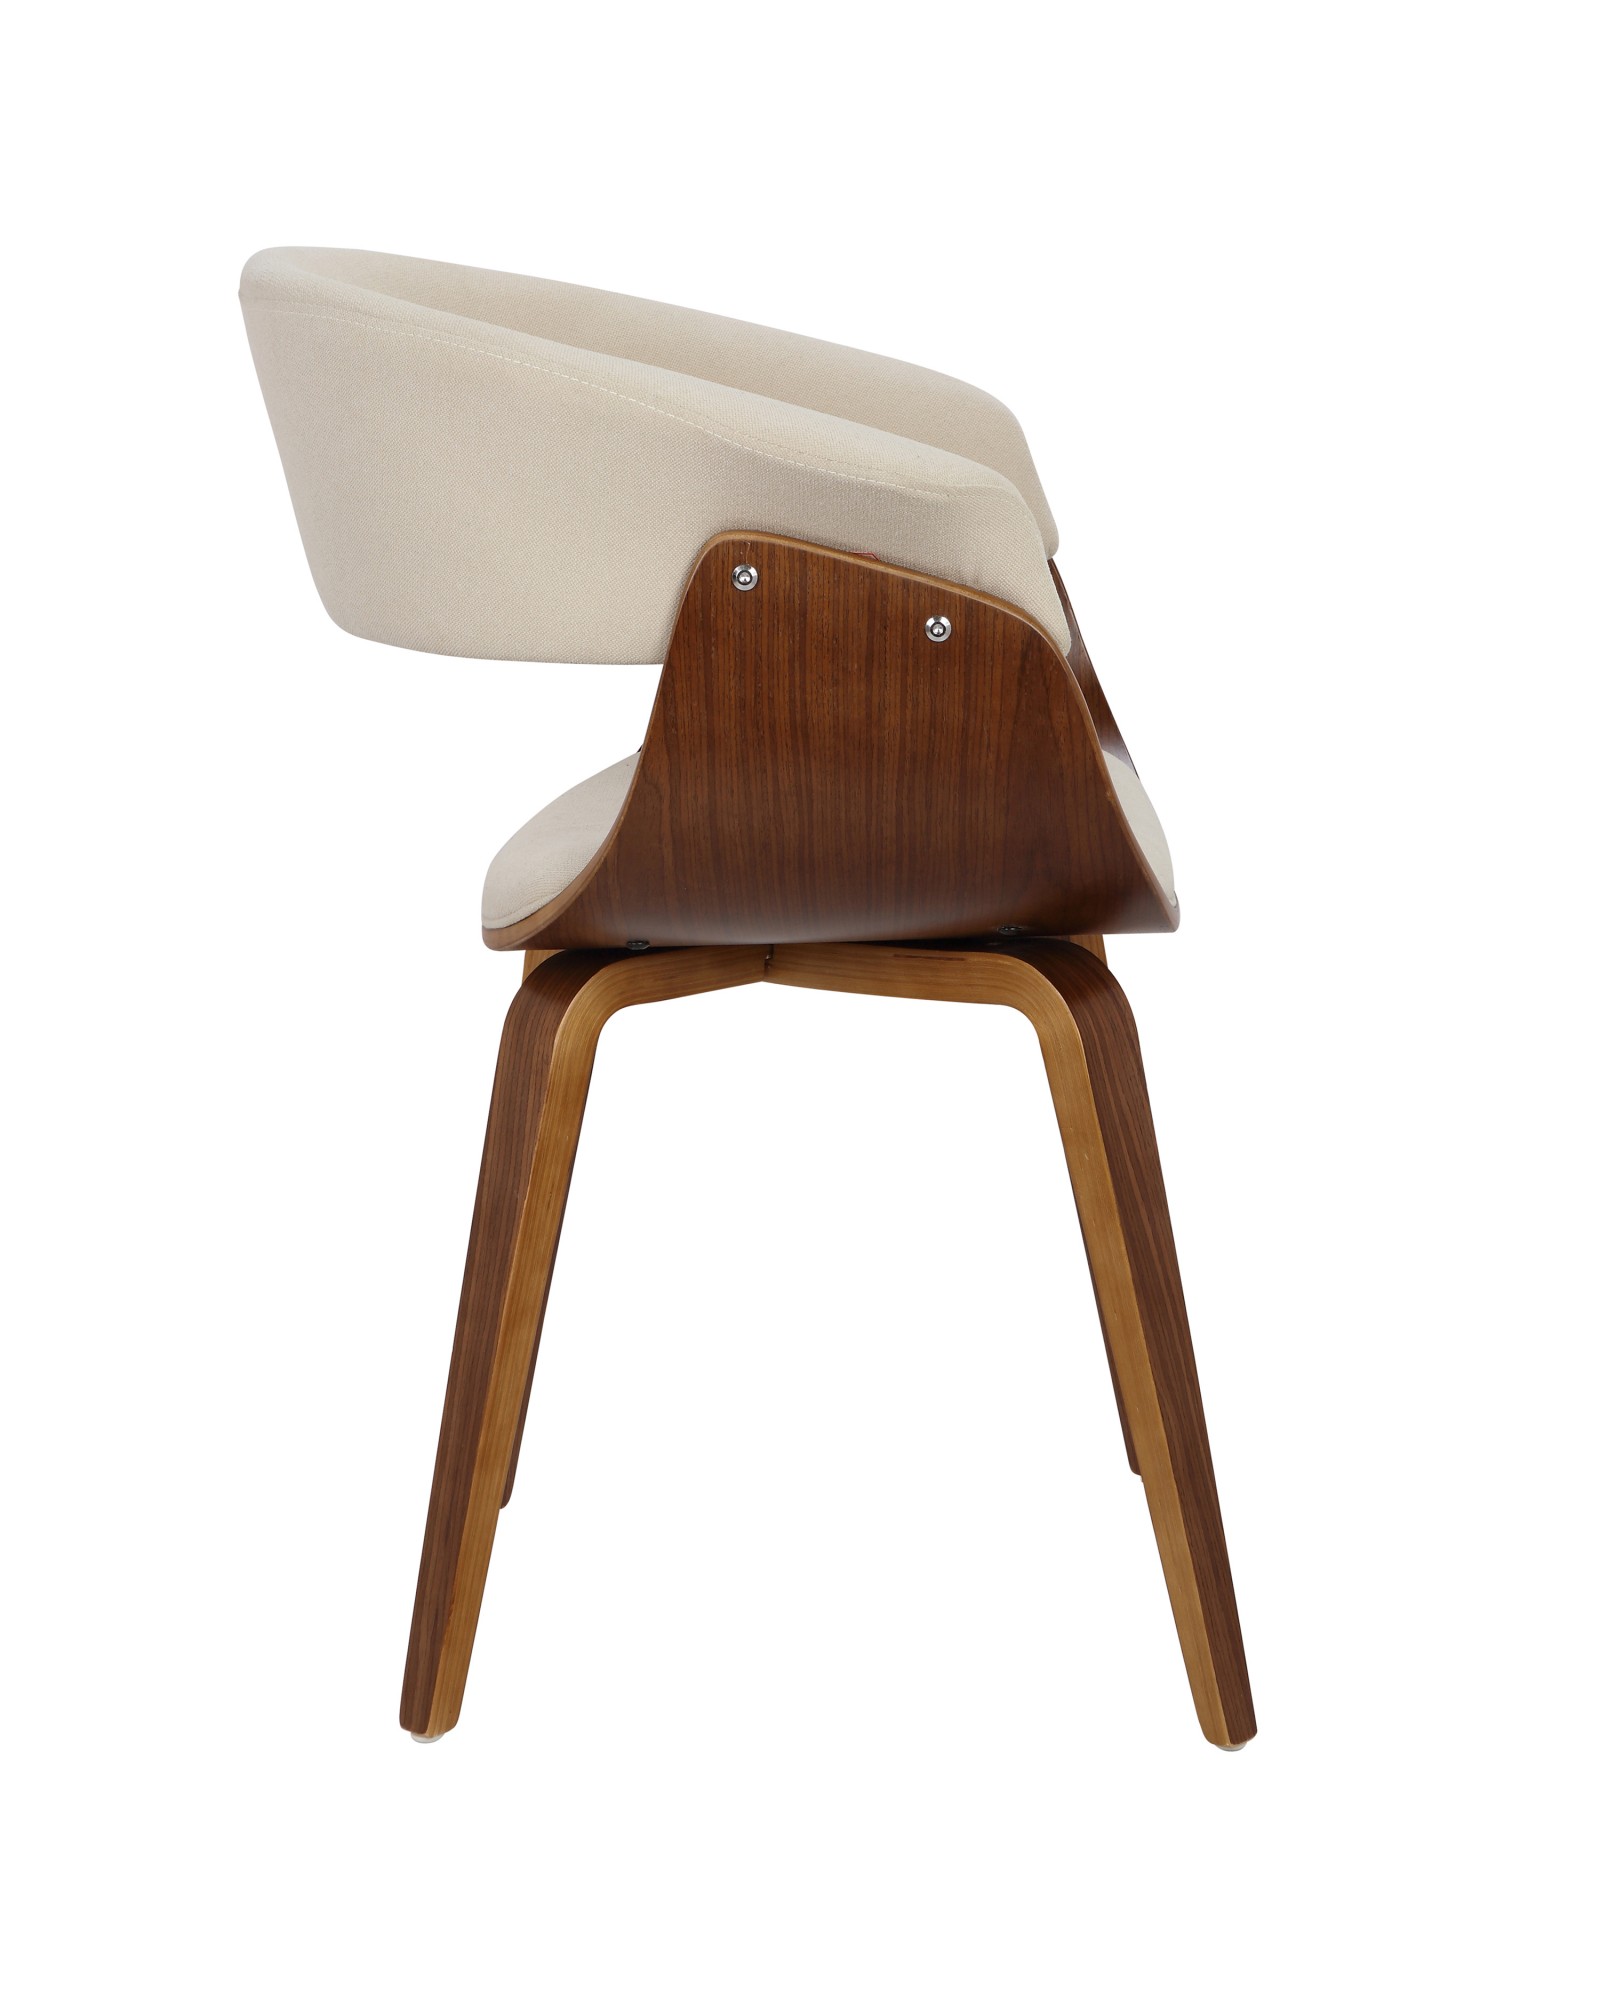 Vintage Mod Mid-Century Modern Dining/Accent Chair in Walnut and Cream